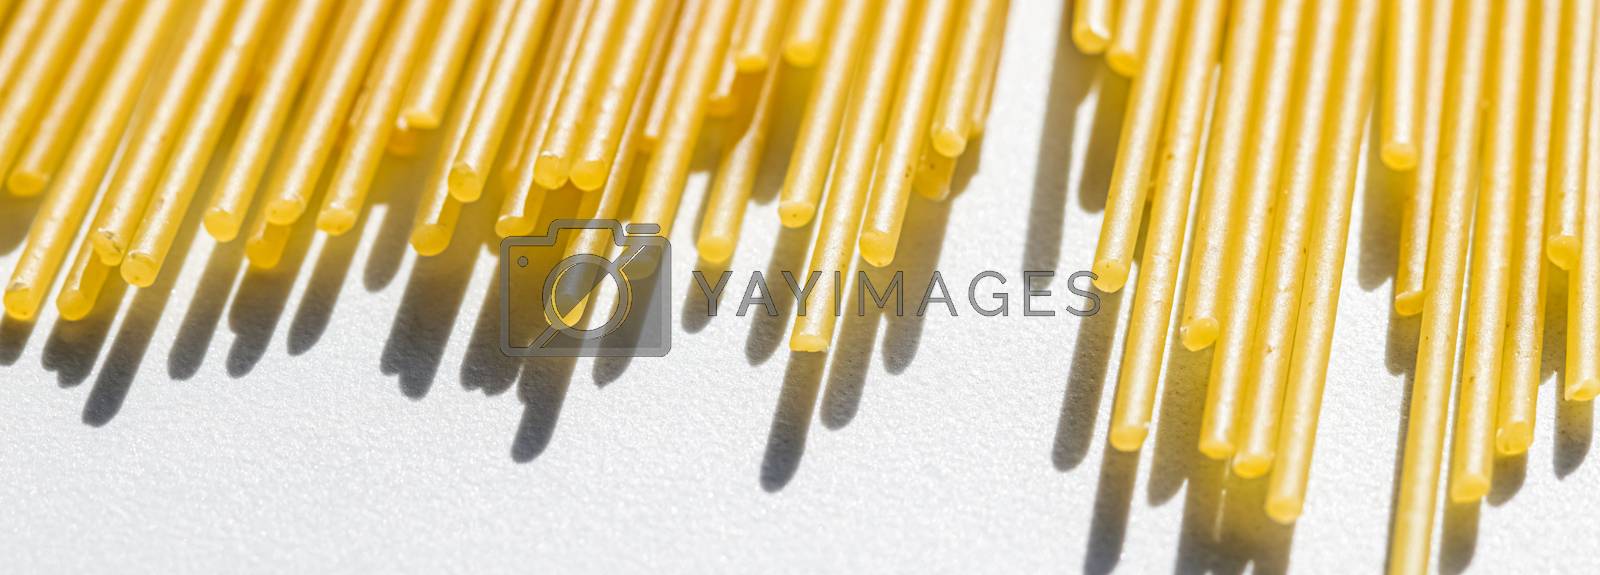 Royalty free image of Uncooked whole grain spaghetti closeup, italian pasta as organic by Anneleven